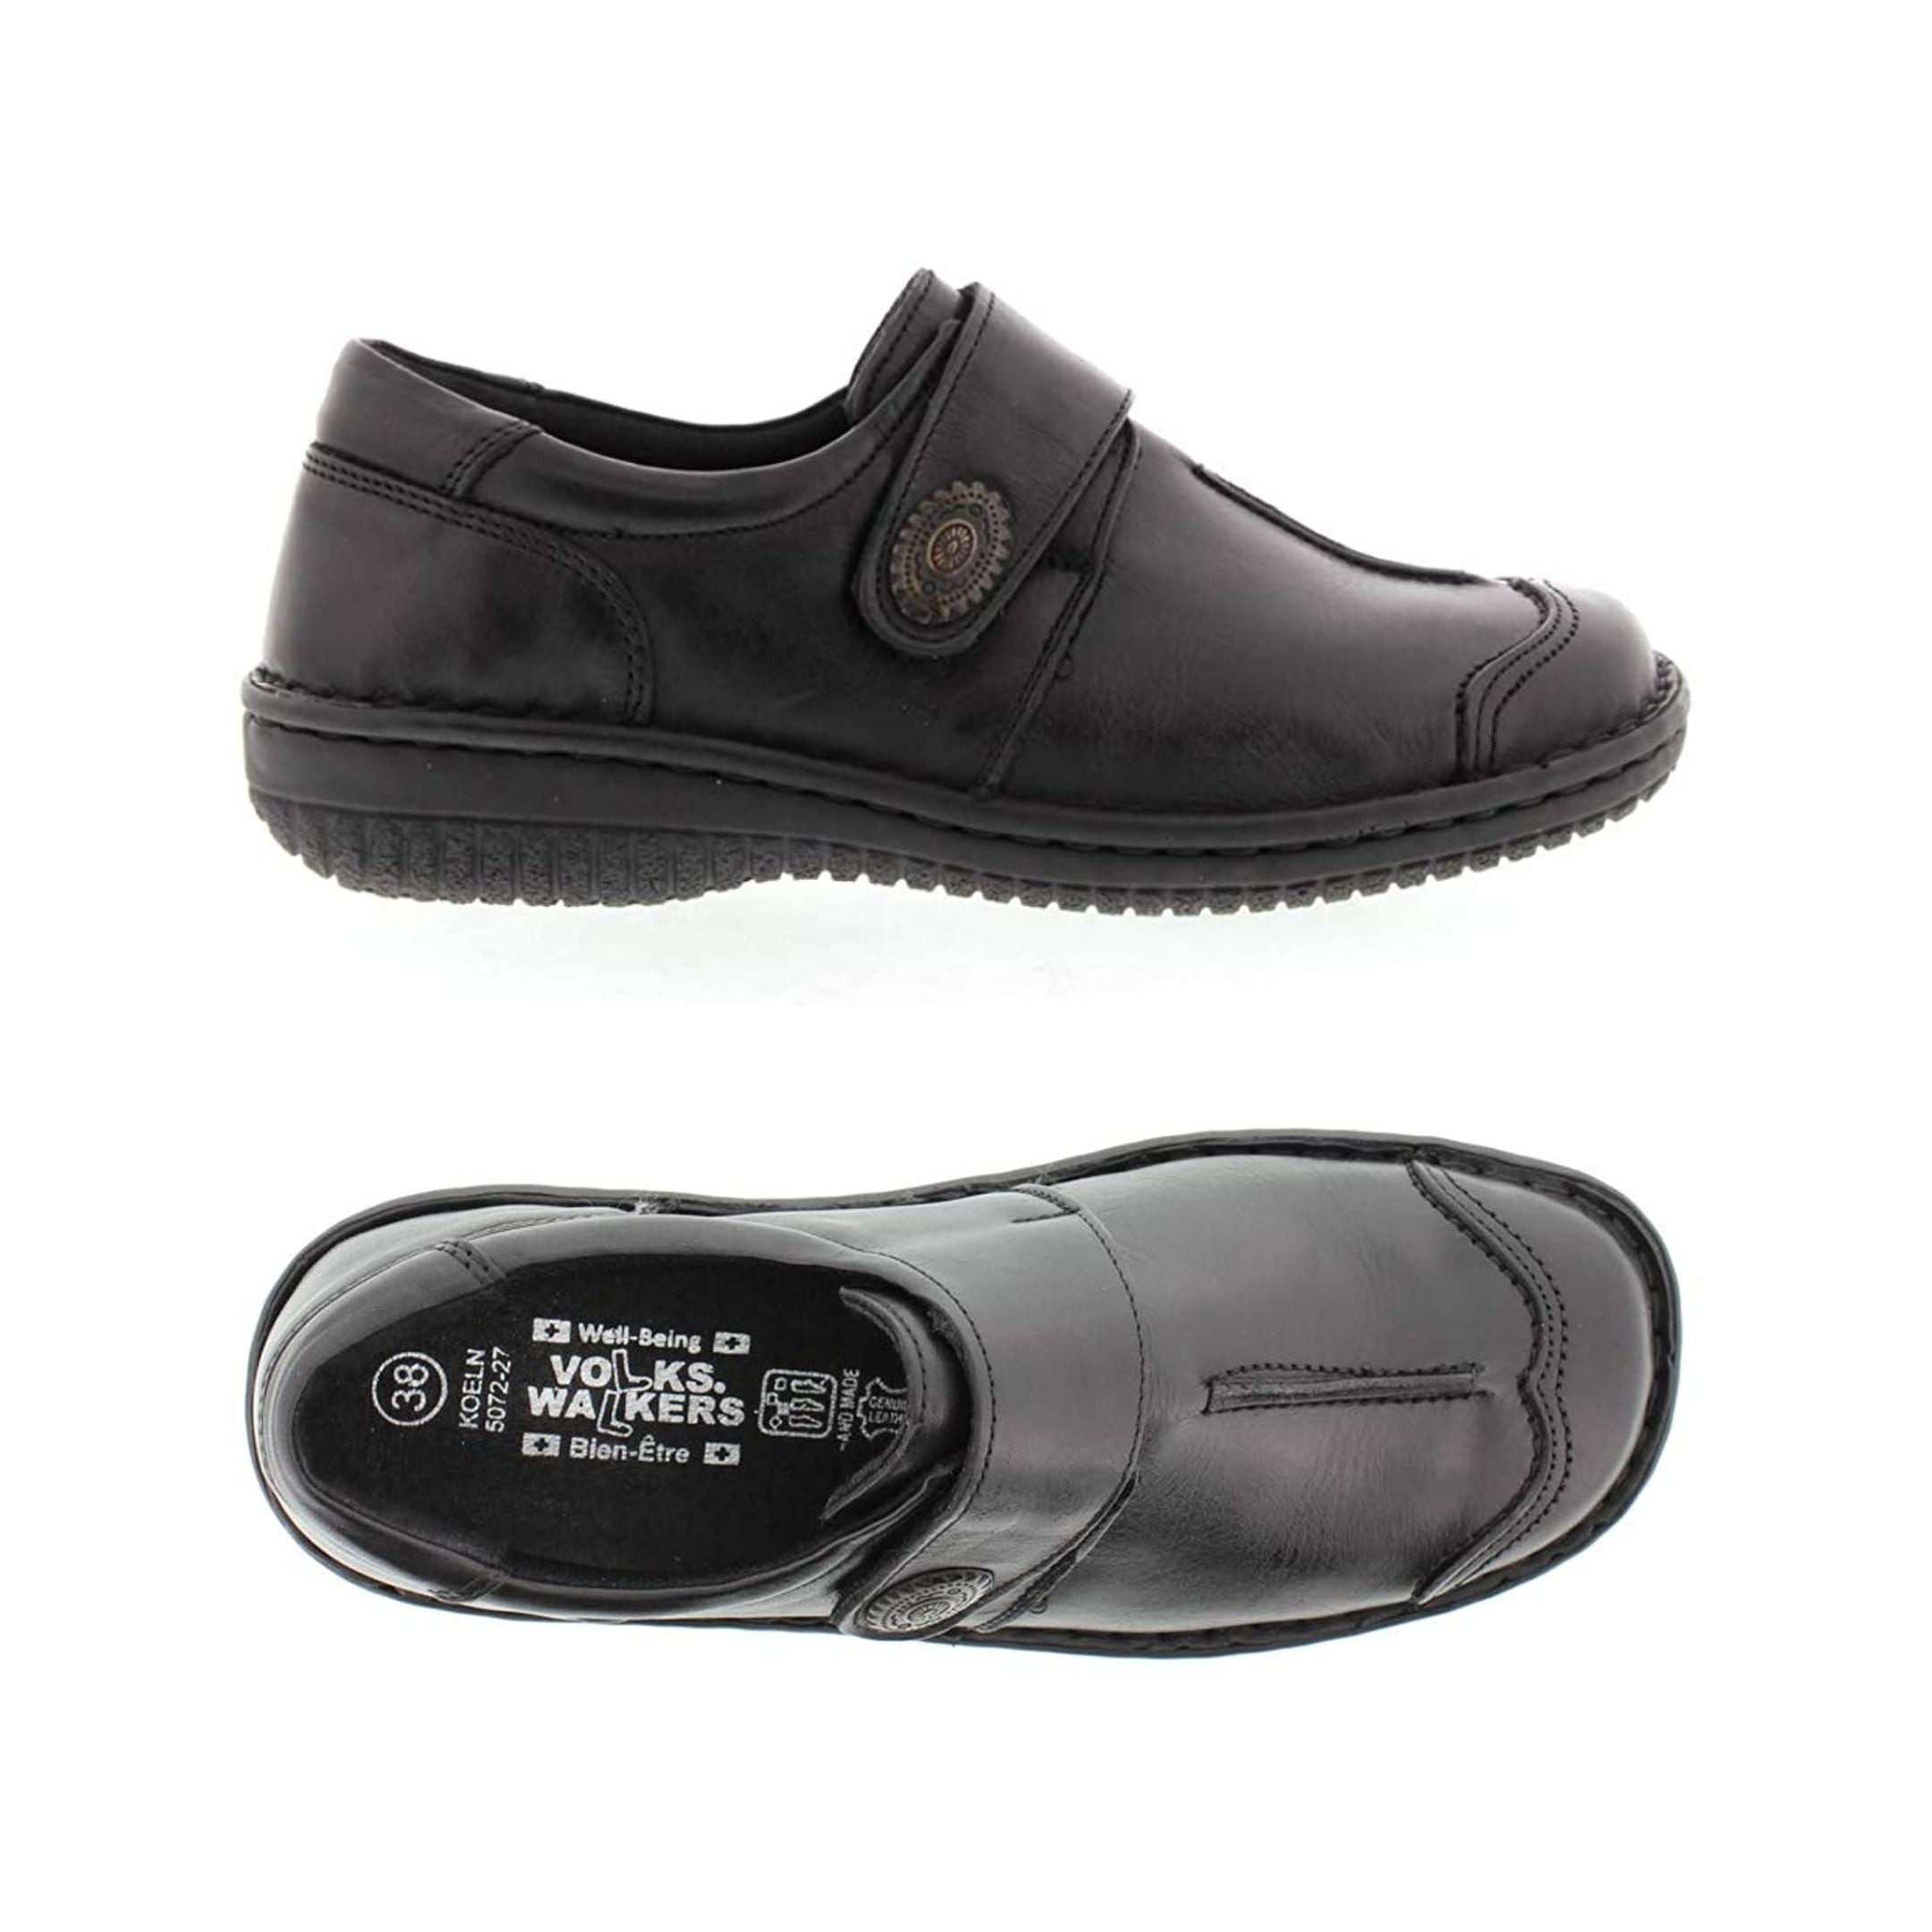 Black slip on shoe with Velcro cross strap with metal detail and detailing stitching from top and side view